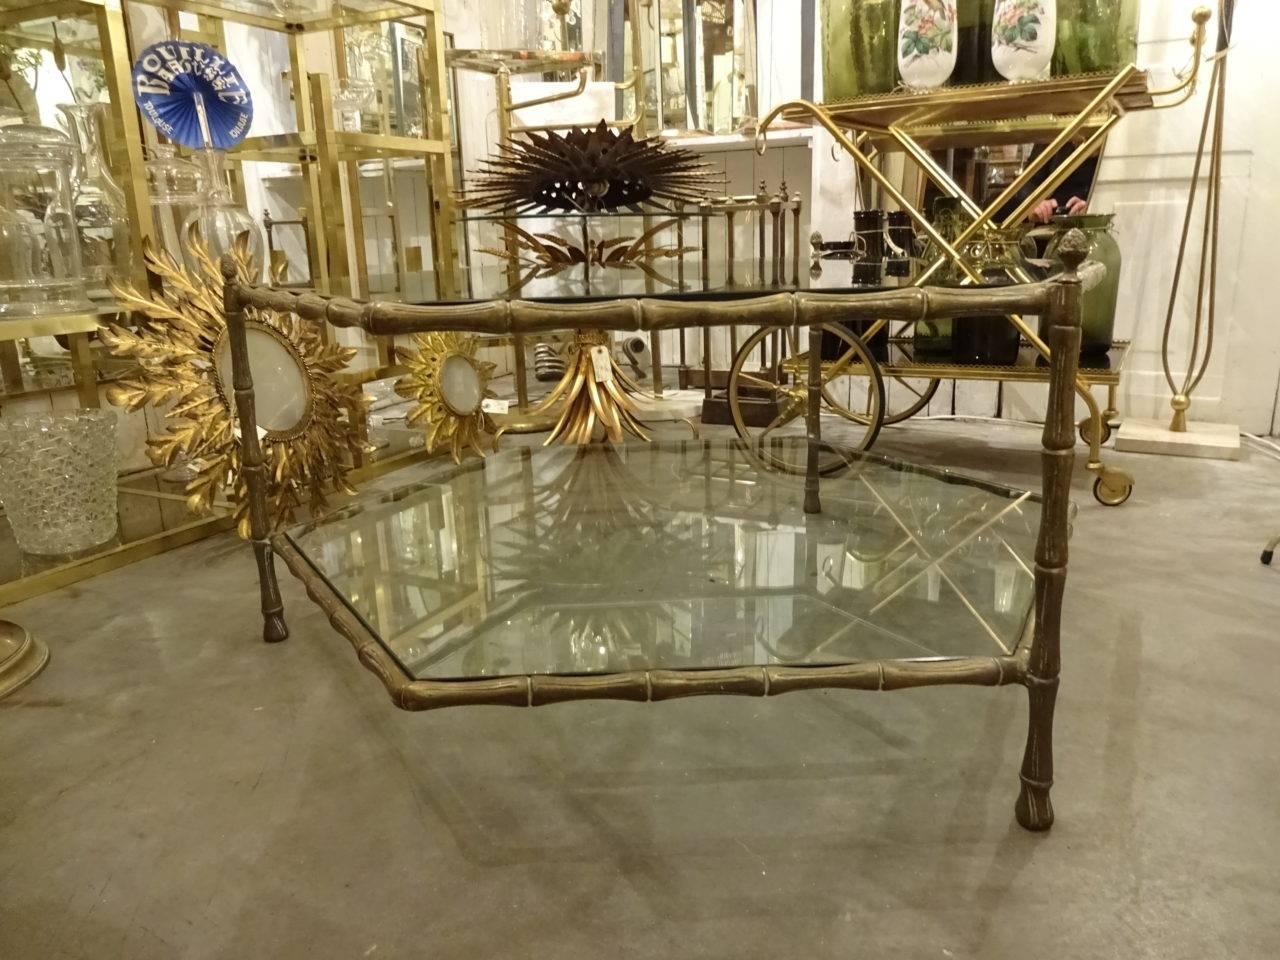 Gorgeous vintage six-sided brass framed three-legged coffee table. The frame is formed as bamboo and the table top and shelf underneath are in solid quality 6 sided glass. Super detail. Eye-catching. Conversation piece.

A rare, stylish and